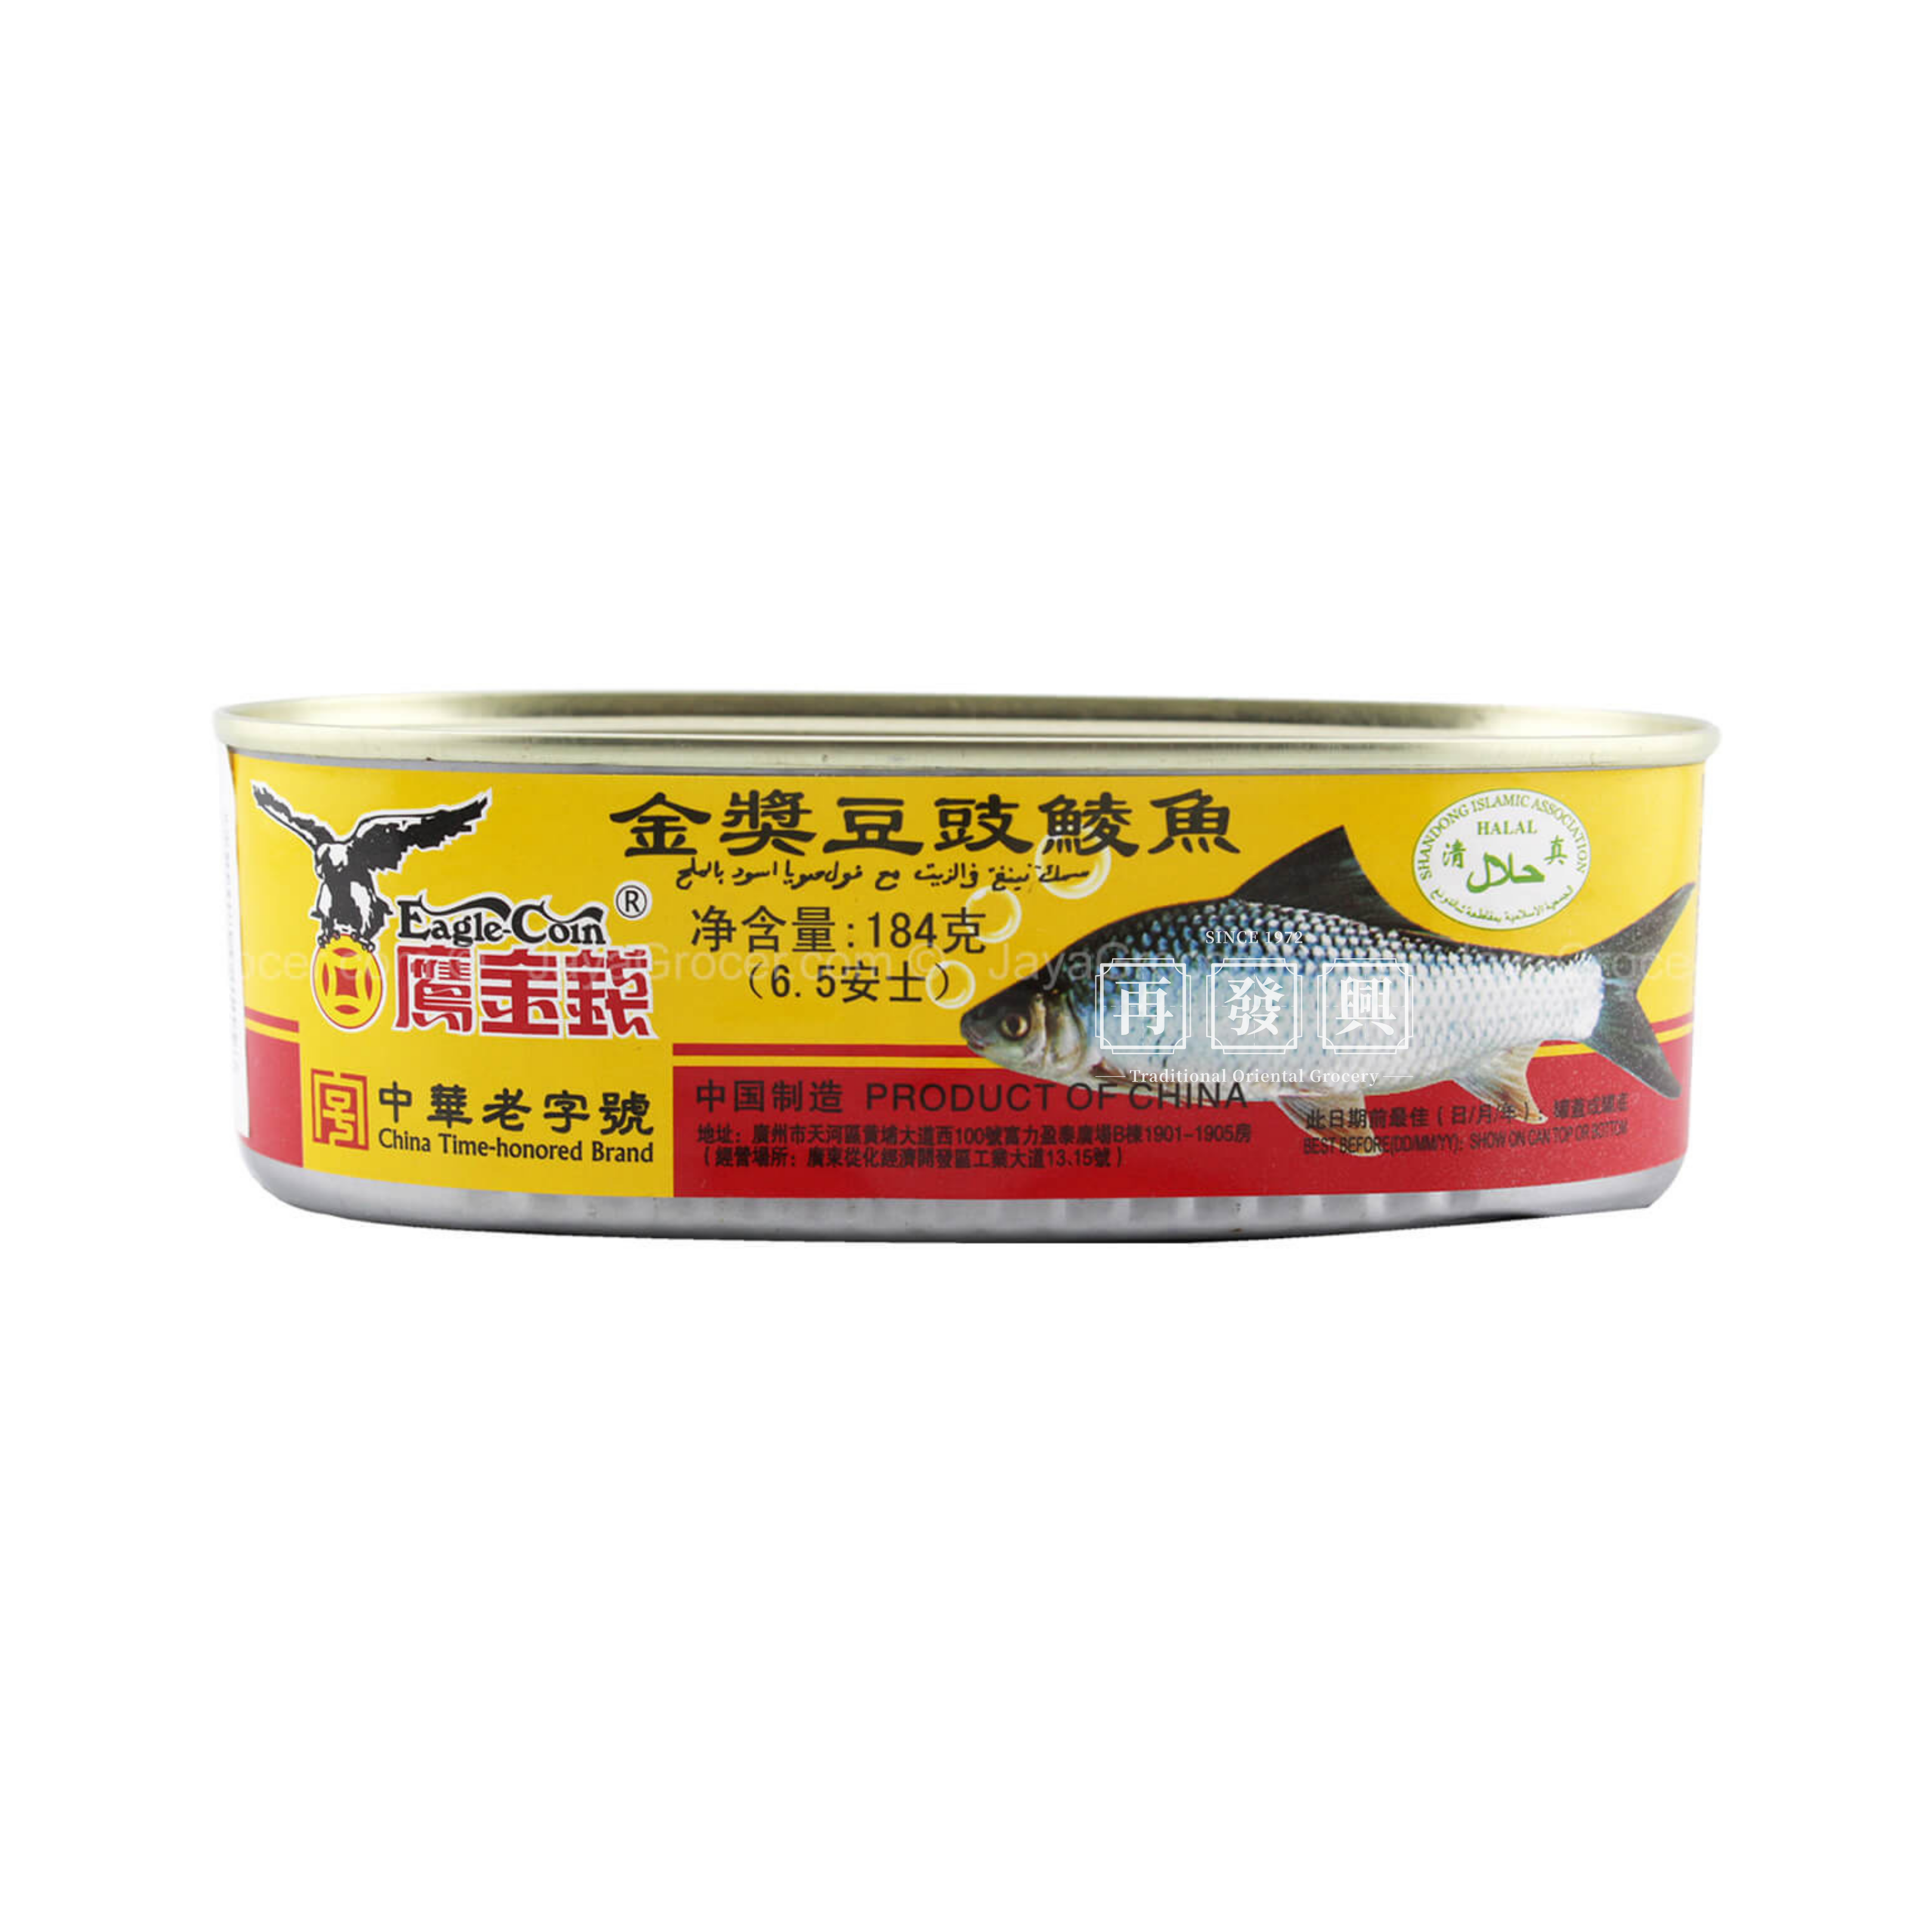 Eagle Coin Fried Dace Fish with Bean 184g